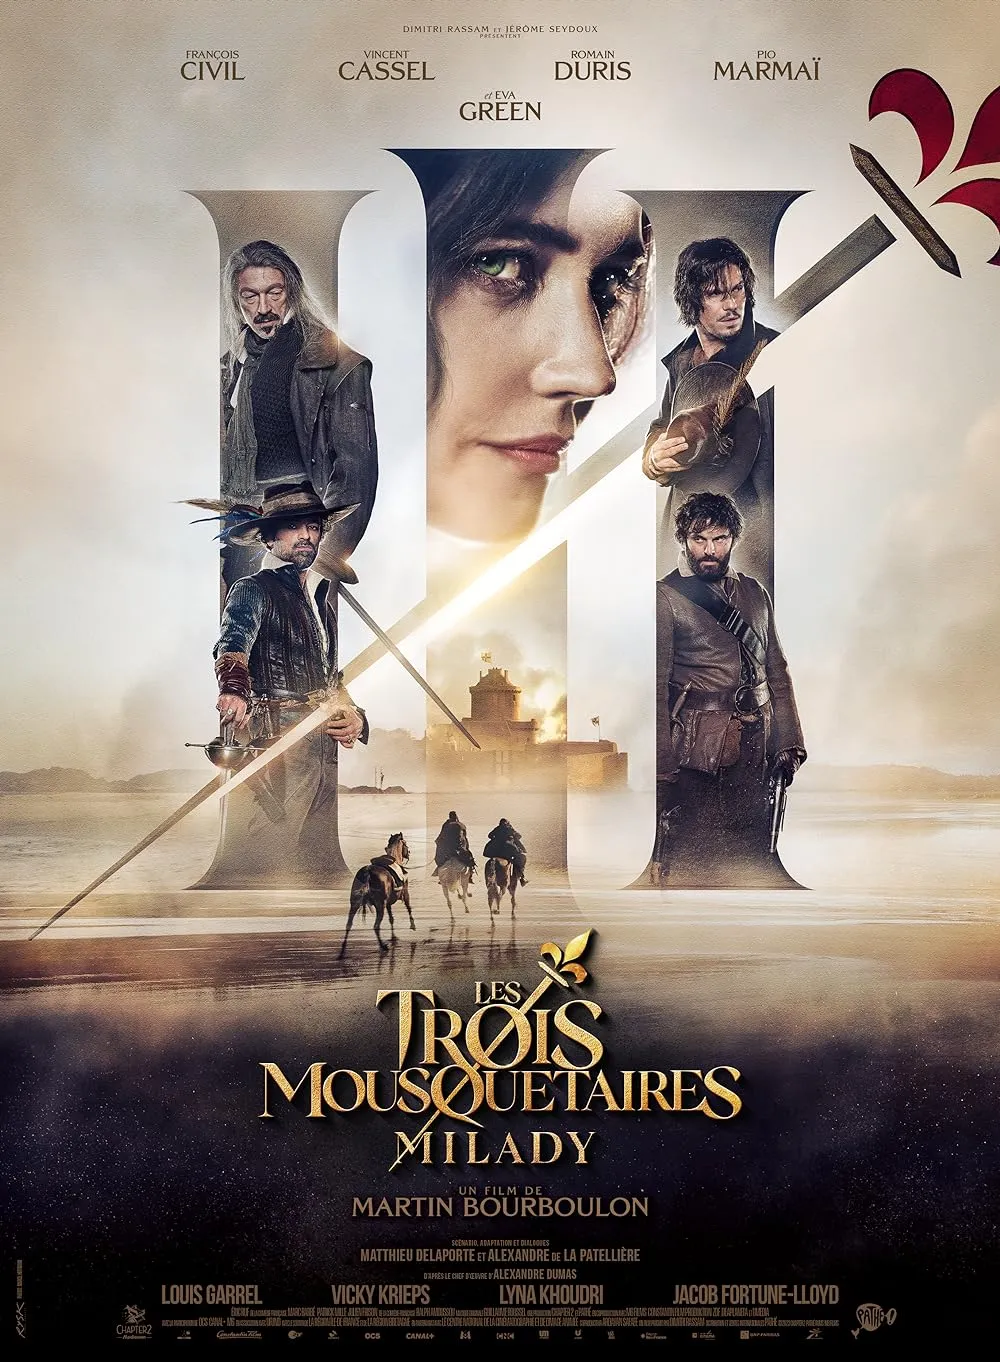 The Three Musketeers Part II Milady 2023 HQ Hindi 720p HDCAMRip 1GB Download